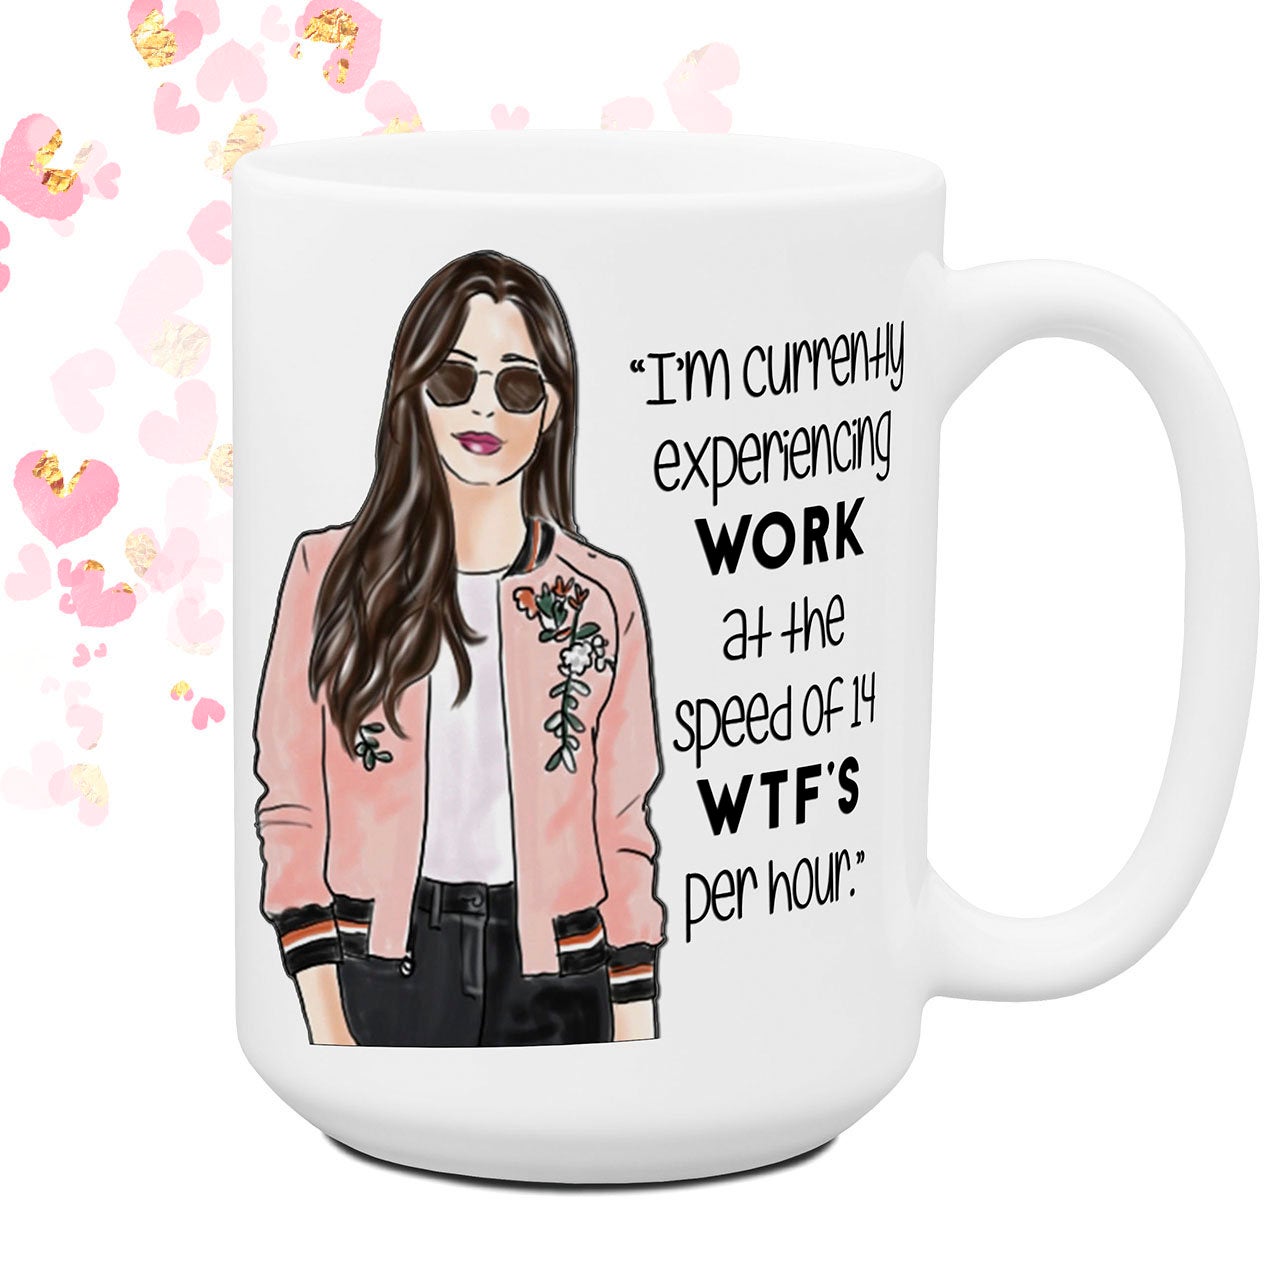 Experiencing Work at 14 WTF's per hour Coffee Mug Office Theme Cup Funny Coworker Gift Ideas Gift for Her